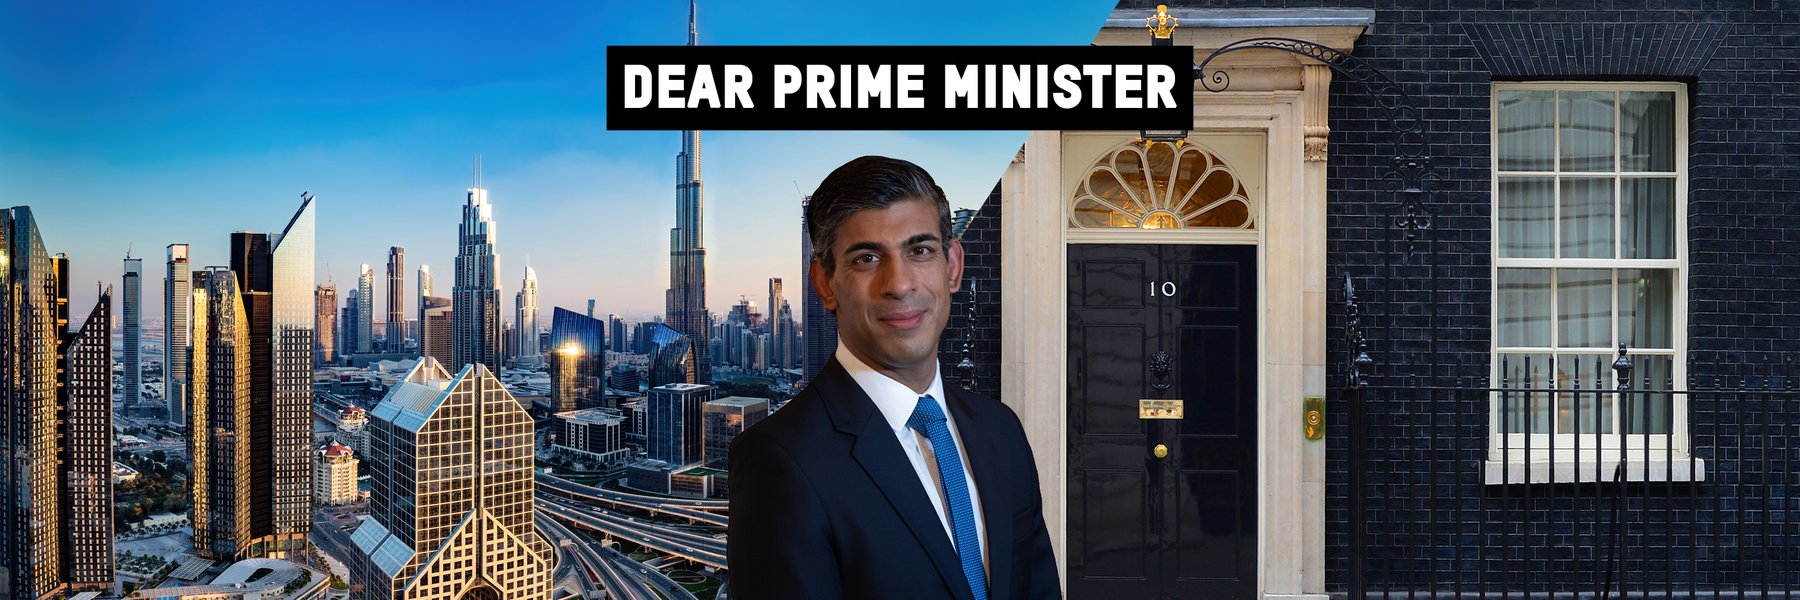 An image of Rishi Sunak and the words 'Dear Prime Minister' above it.